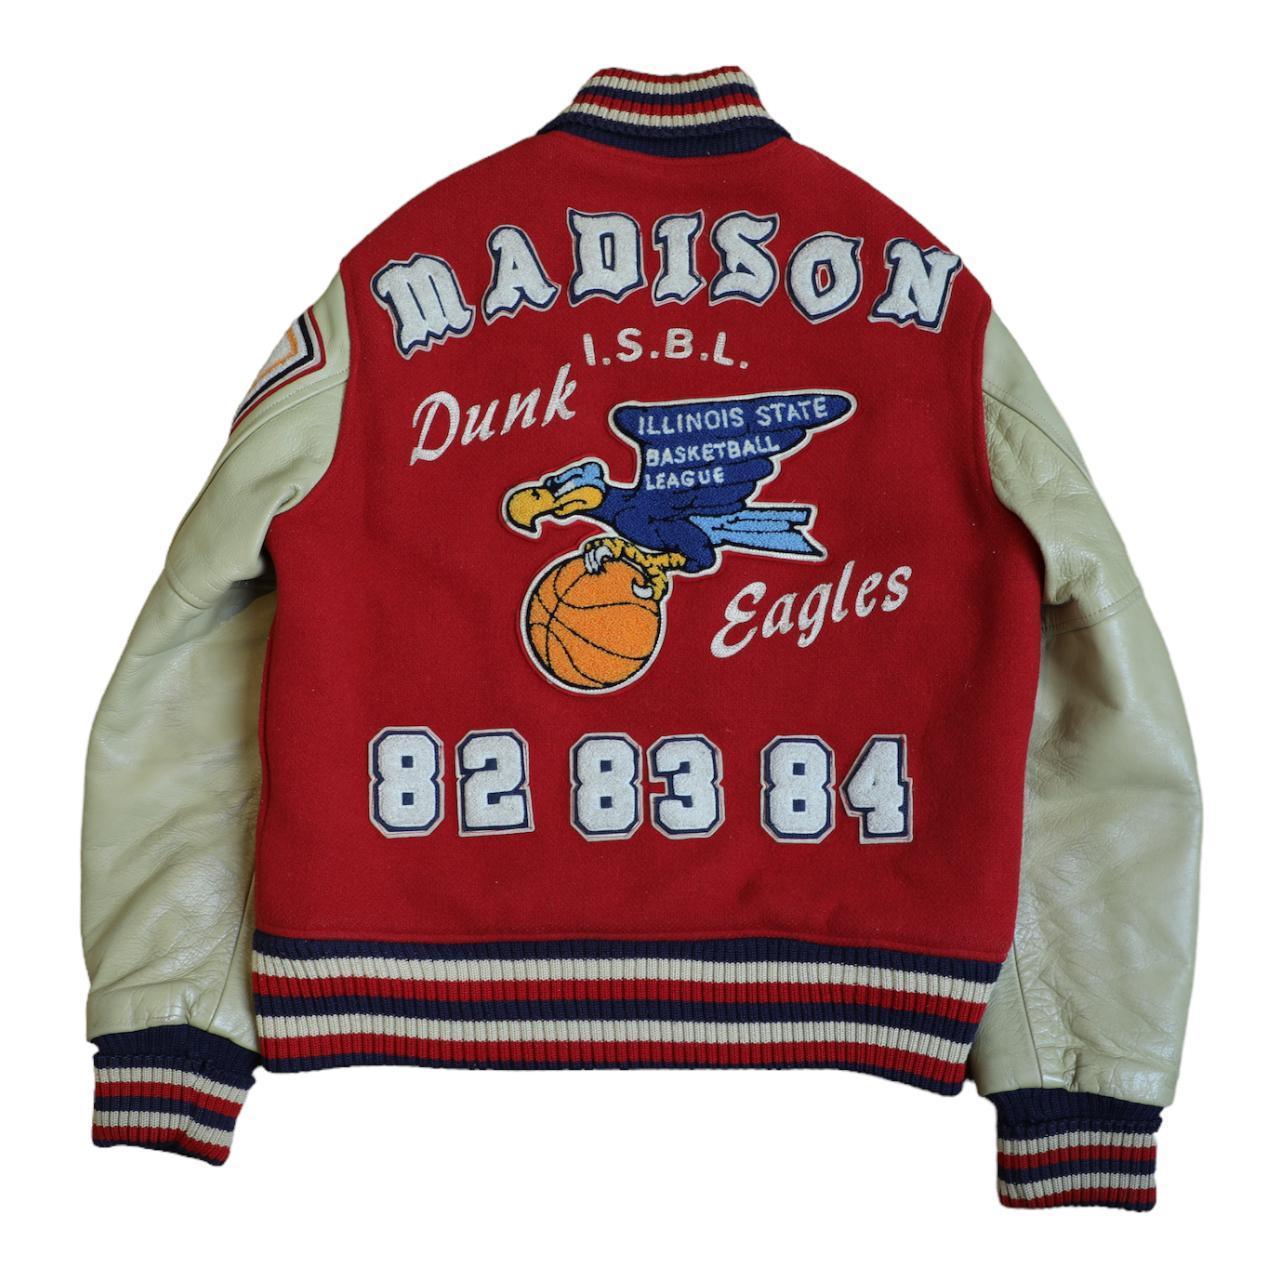 Whitesville 1982-1984 Madison Dunk Eagles, 38/ Award Jacket Red/Cream Patches - Known Source